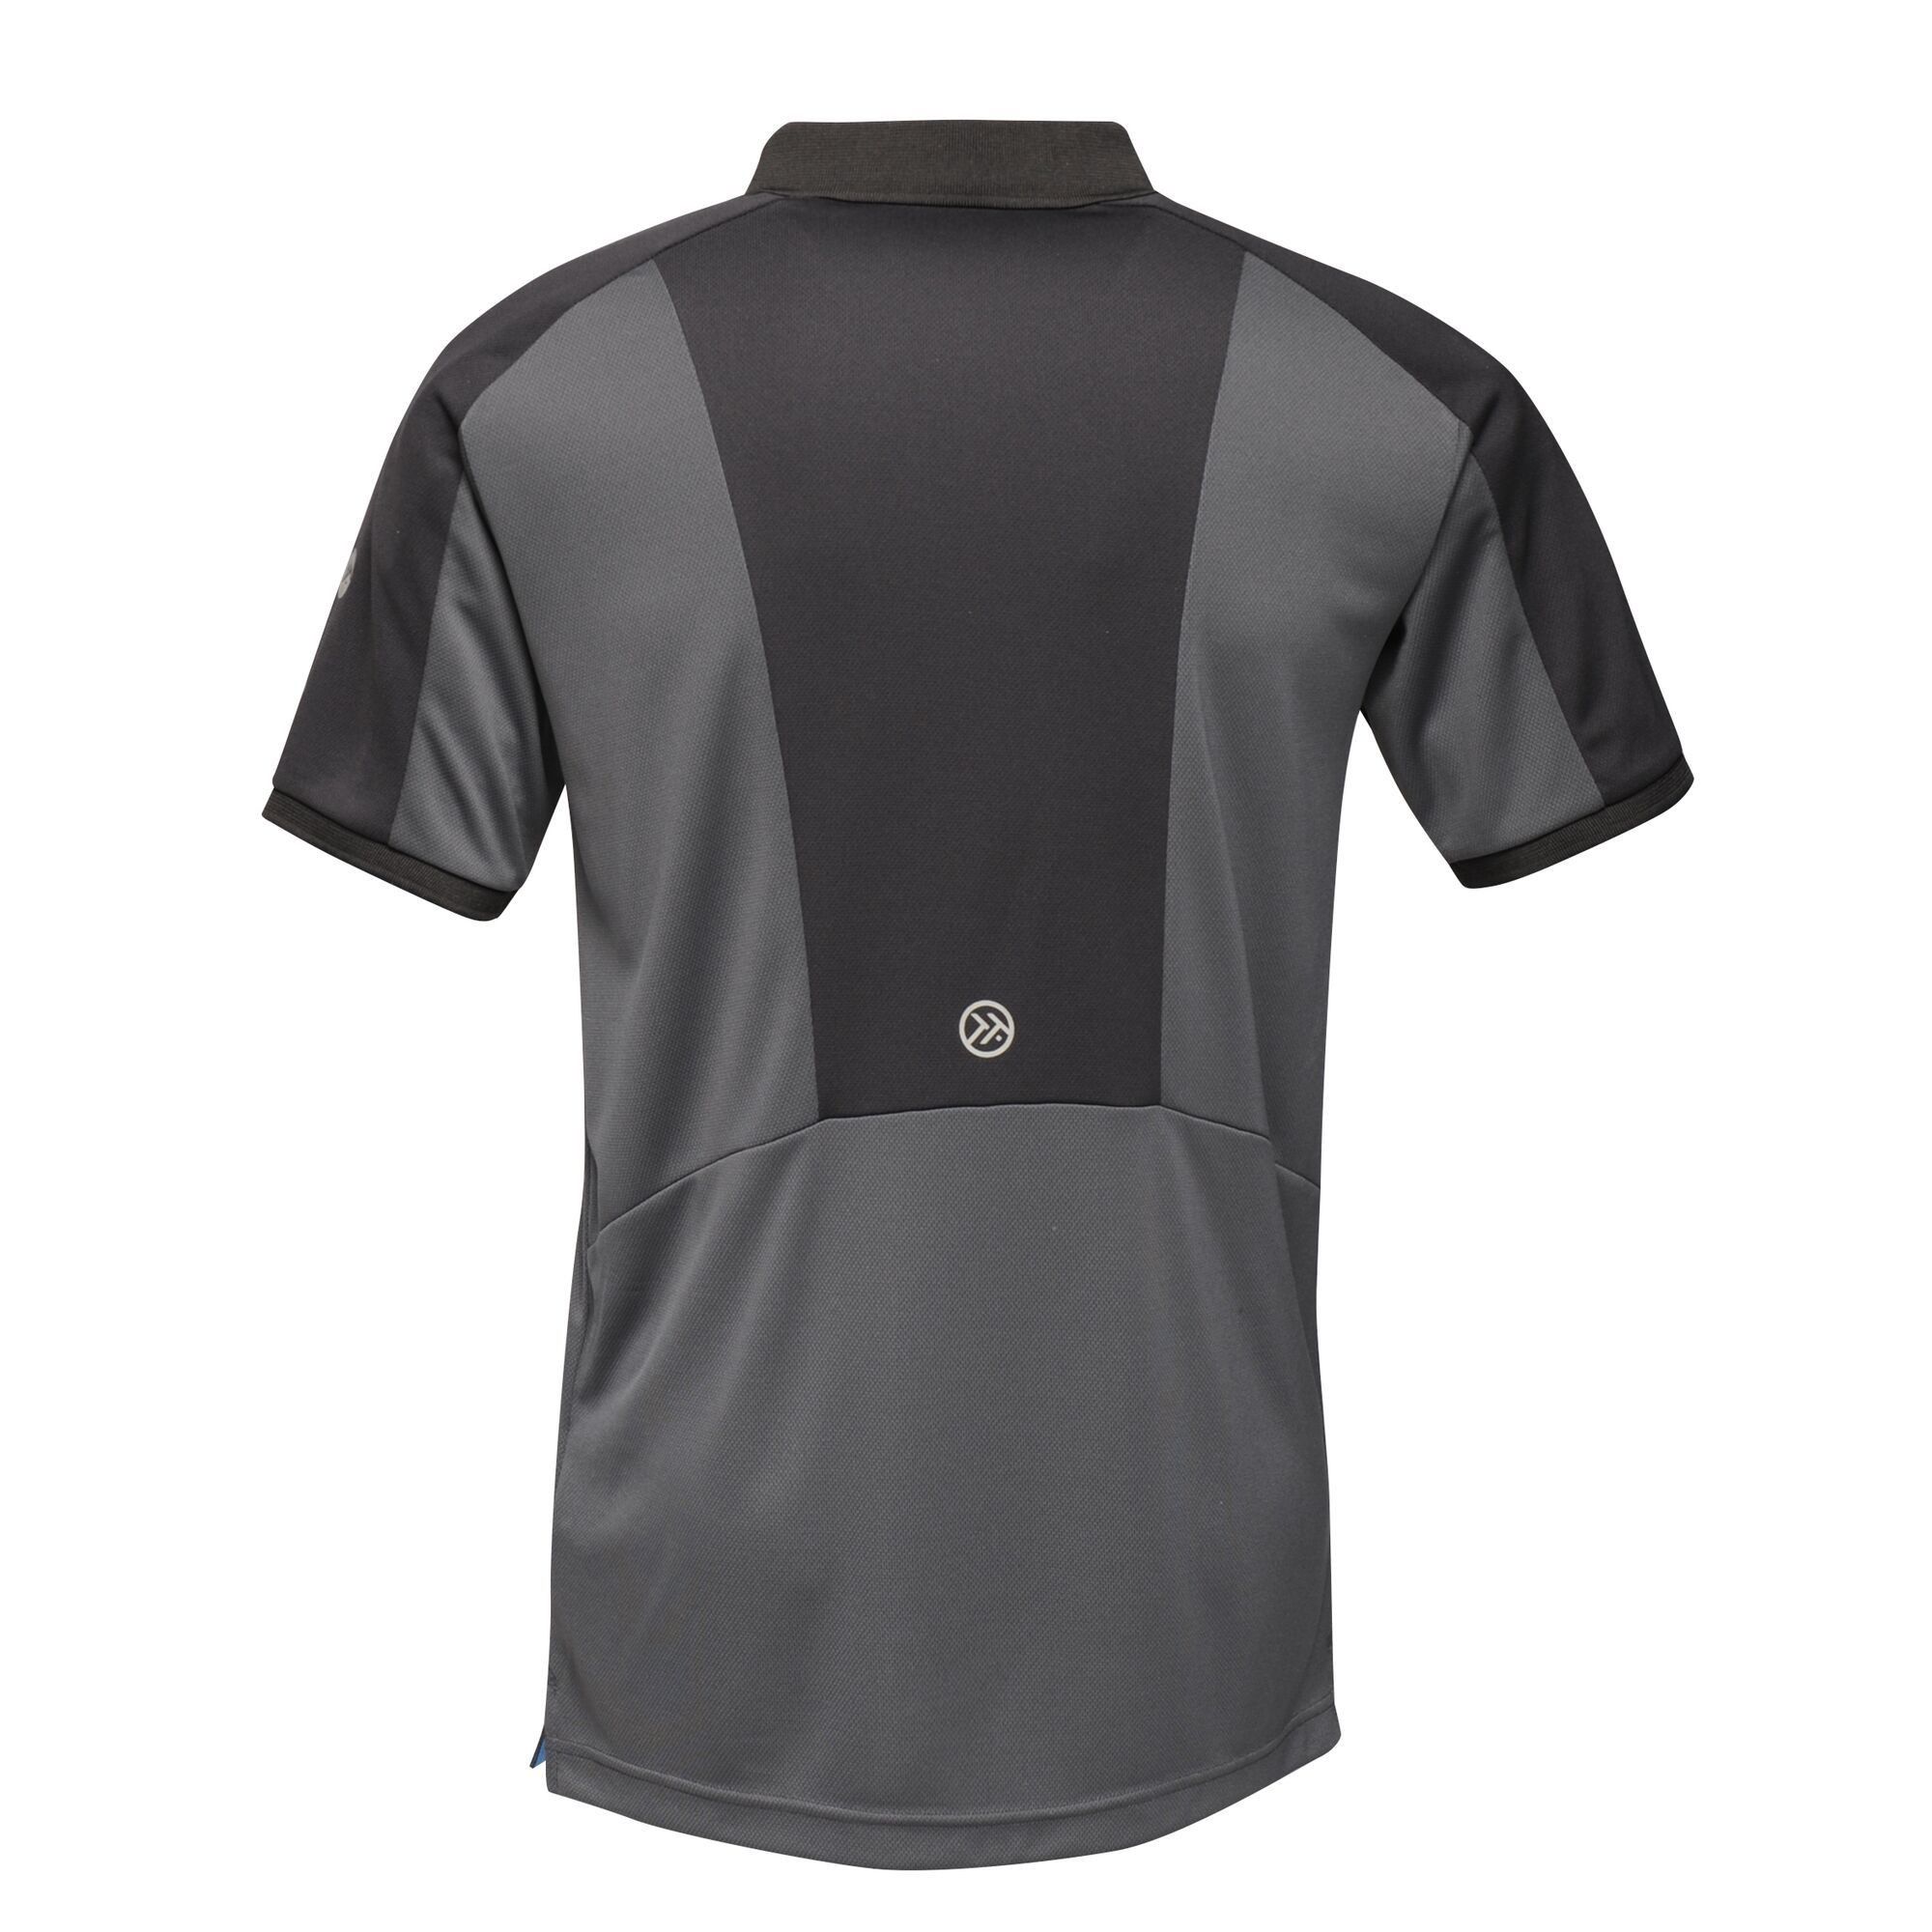 100% Polyester. Quick dry fabric. Moisture wicking performance. 3 button placket and chest pocket. Ribbed collar and cuffs. Side vents.